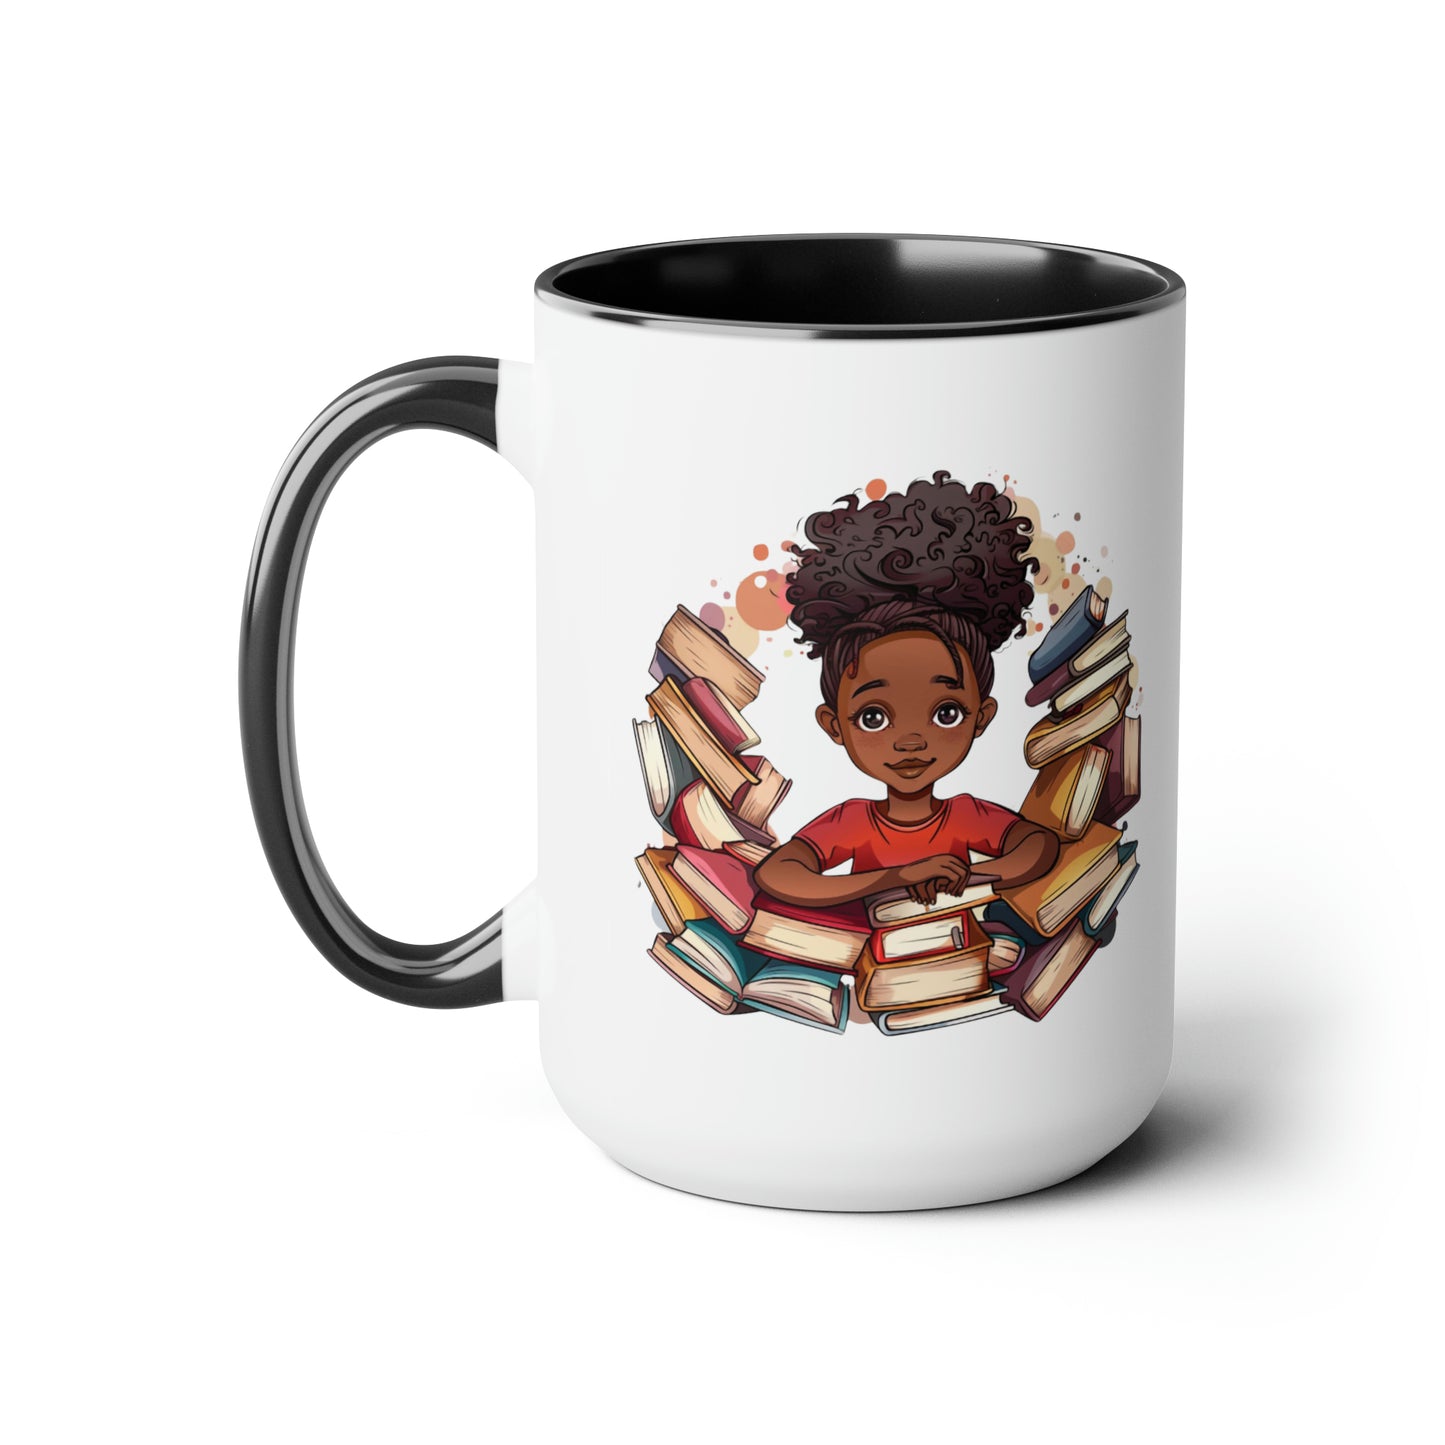 Knowledge Princess Surrounded By Books 15 oz Two-Toned Mug